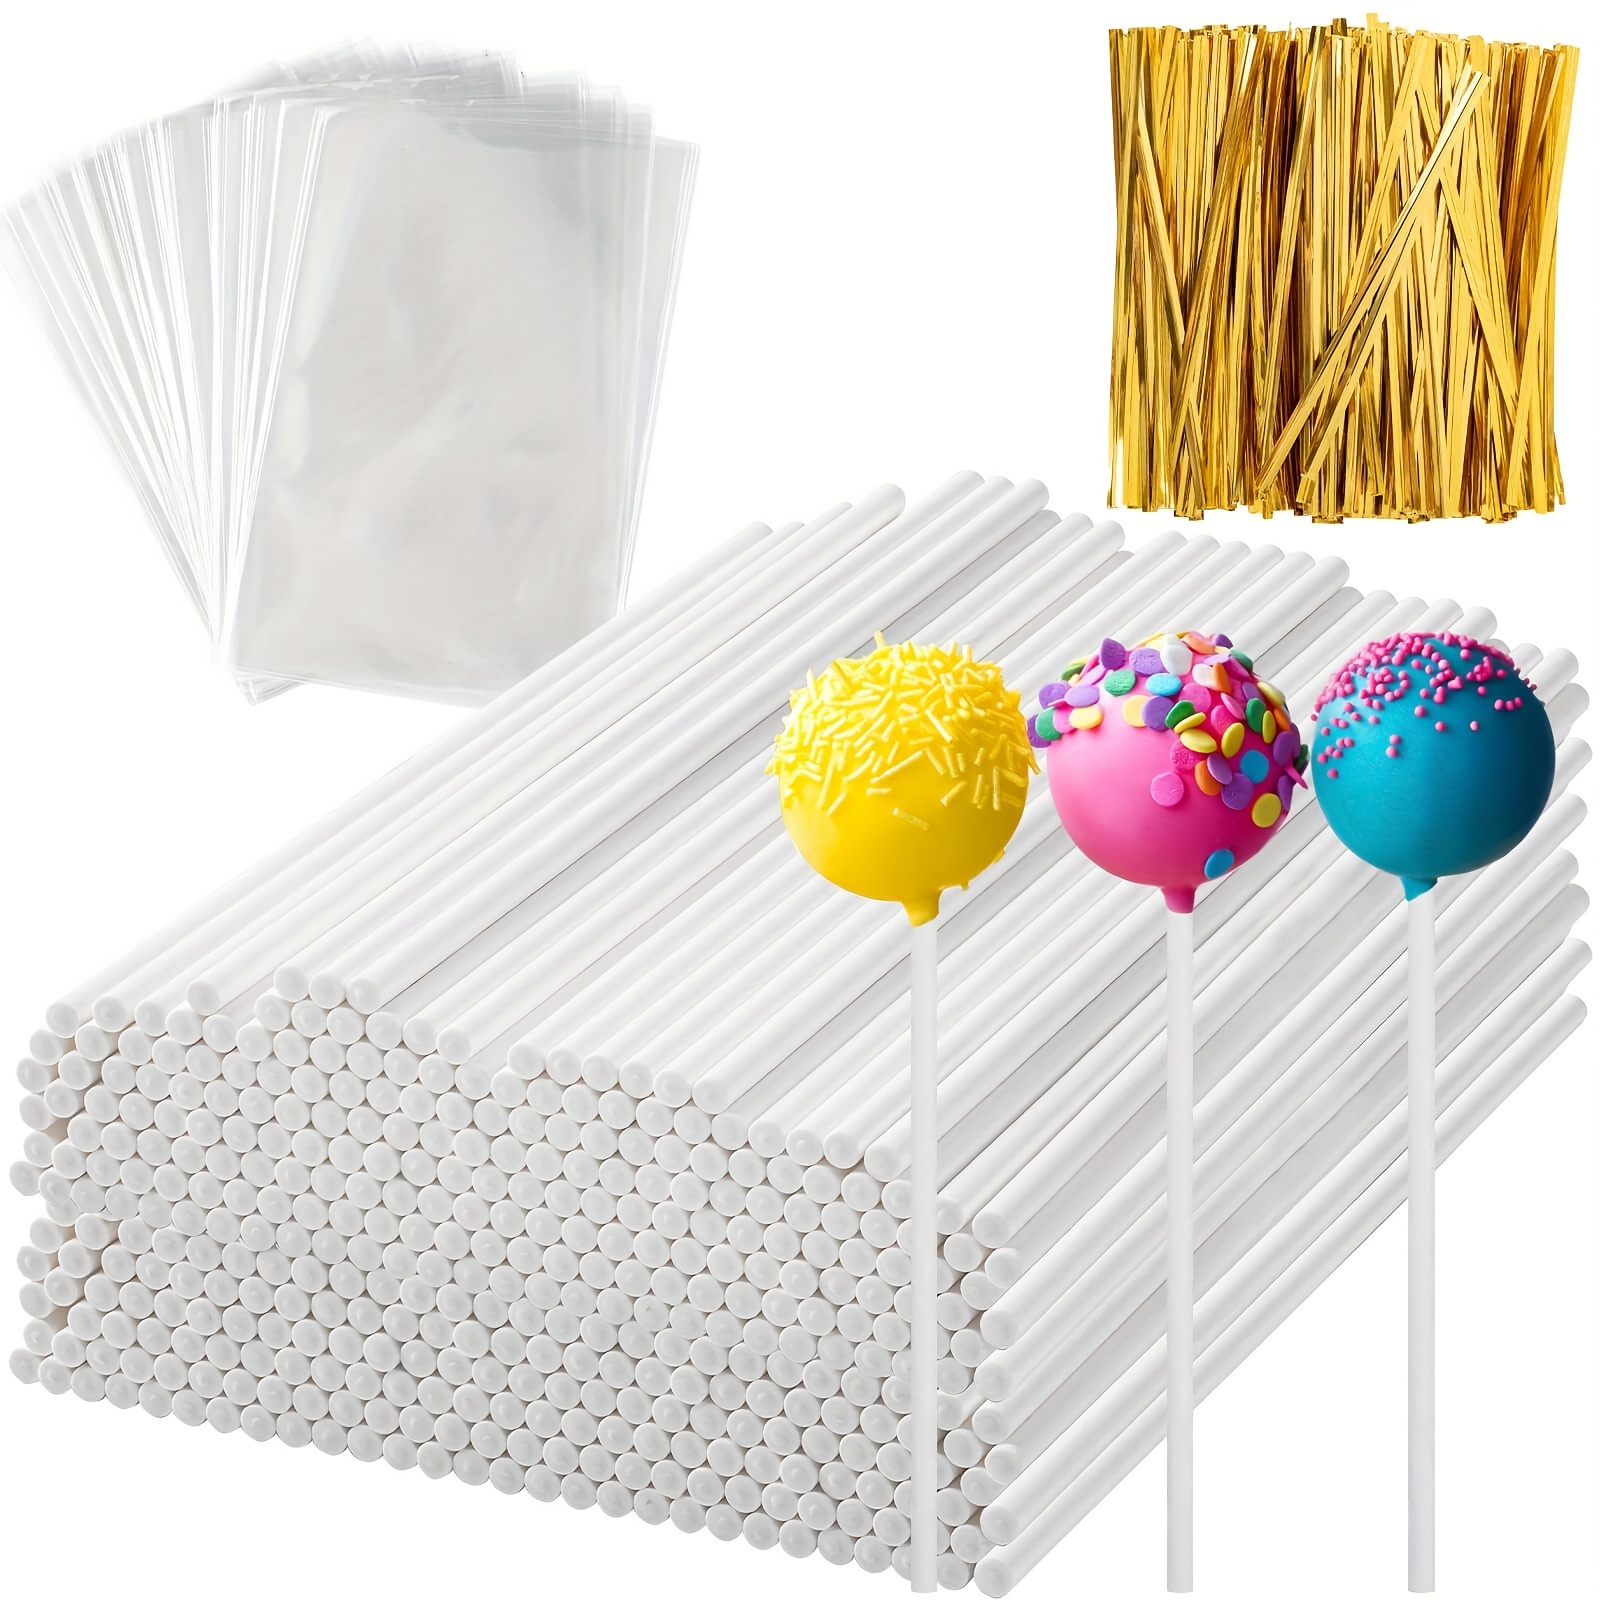 Silicone Cake Pop Mold Set for Lollipop Hard Candy Chocolate Cake  Decorating with 100pcs Paper Sticks